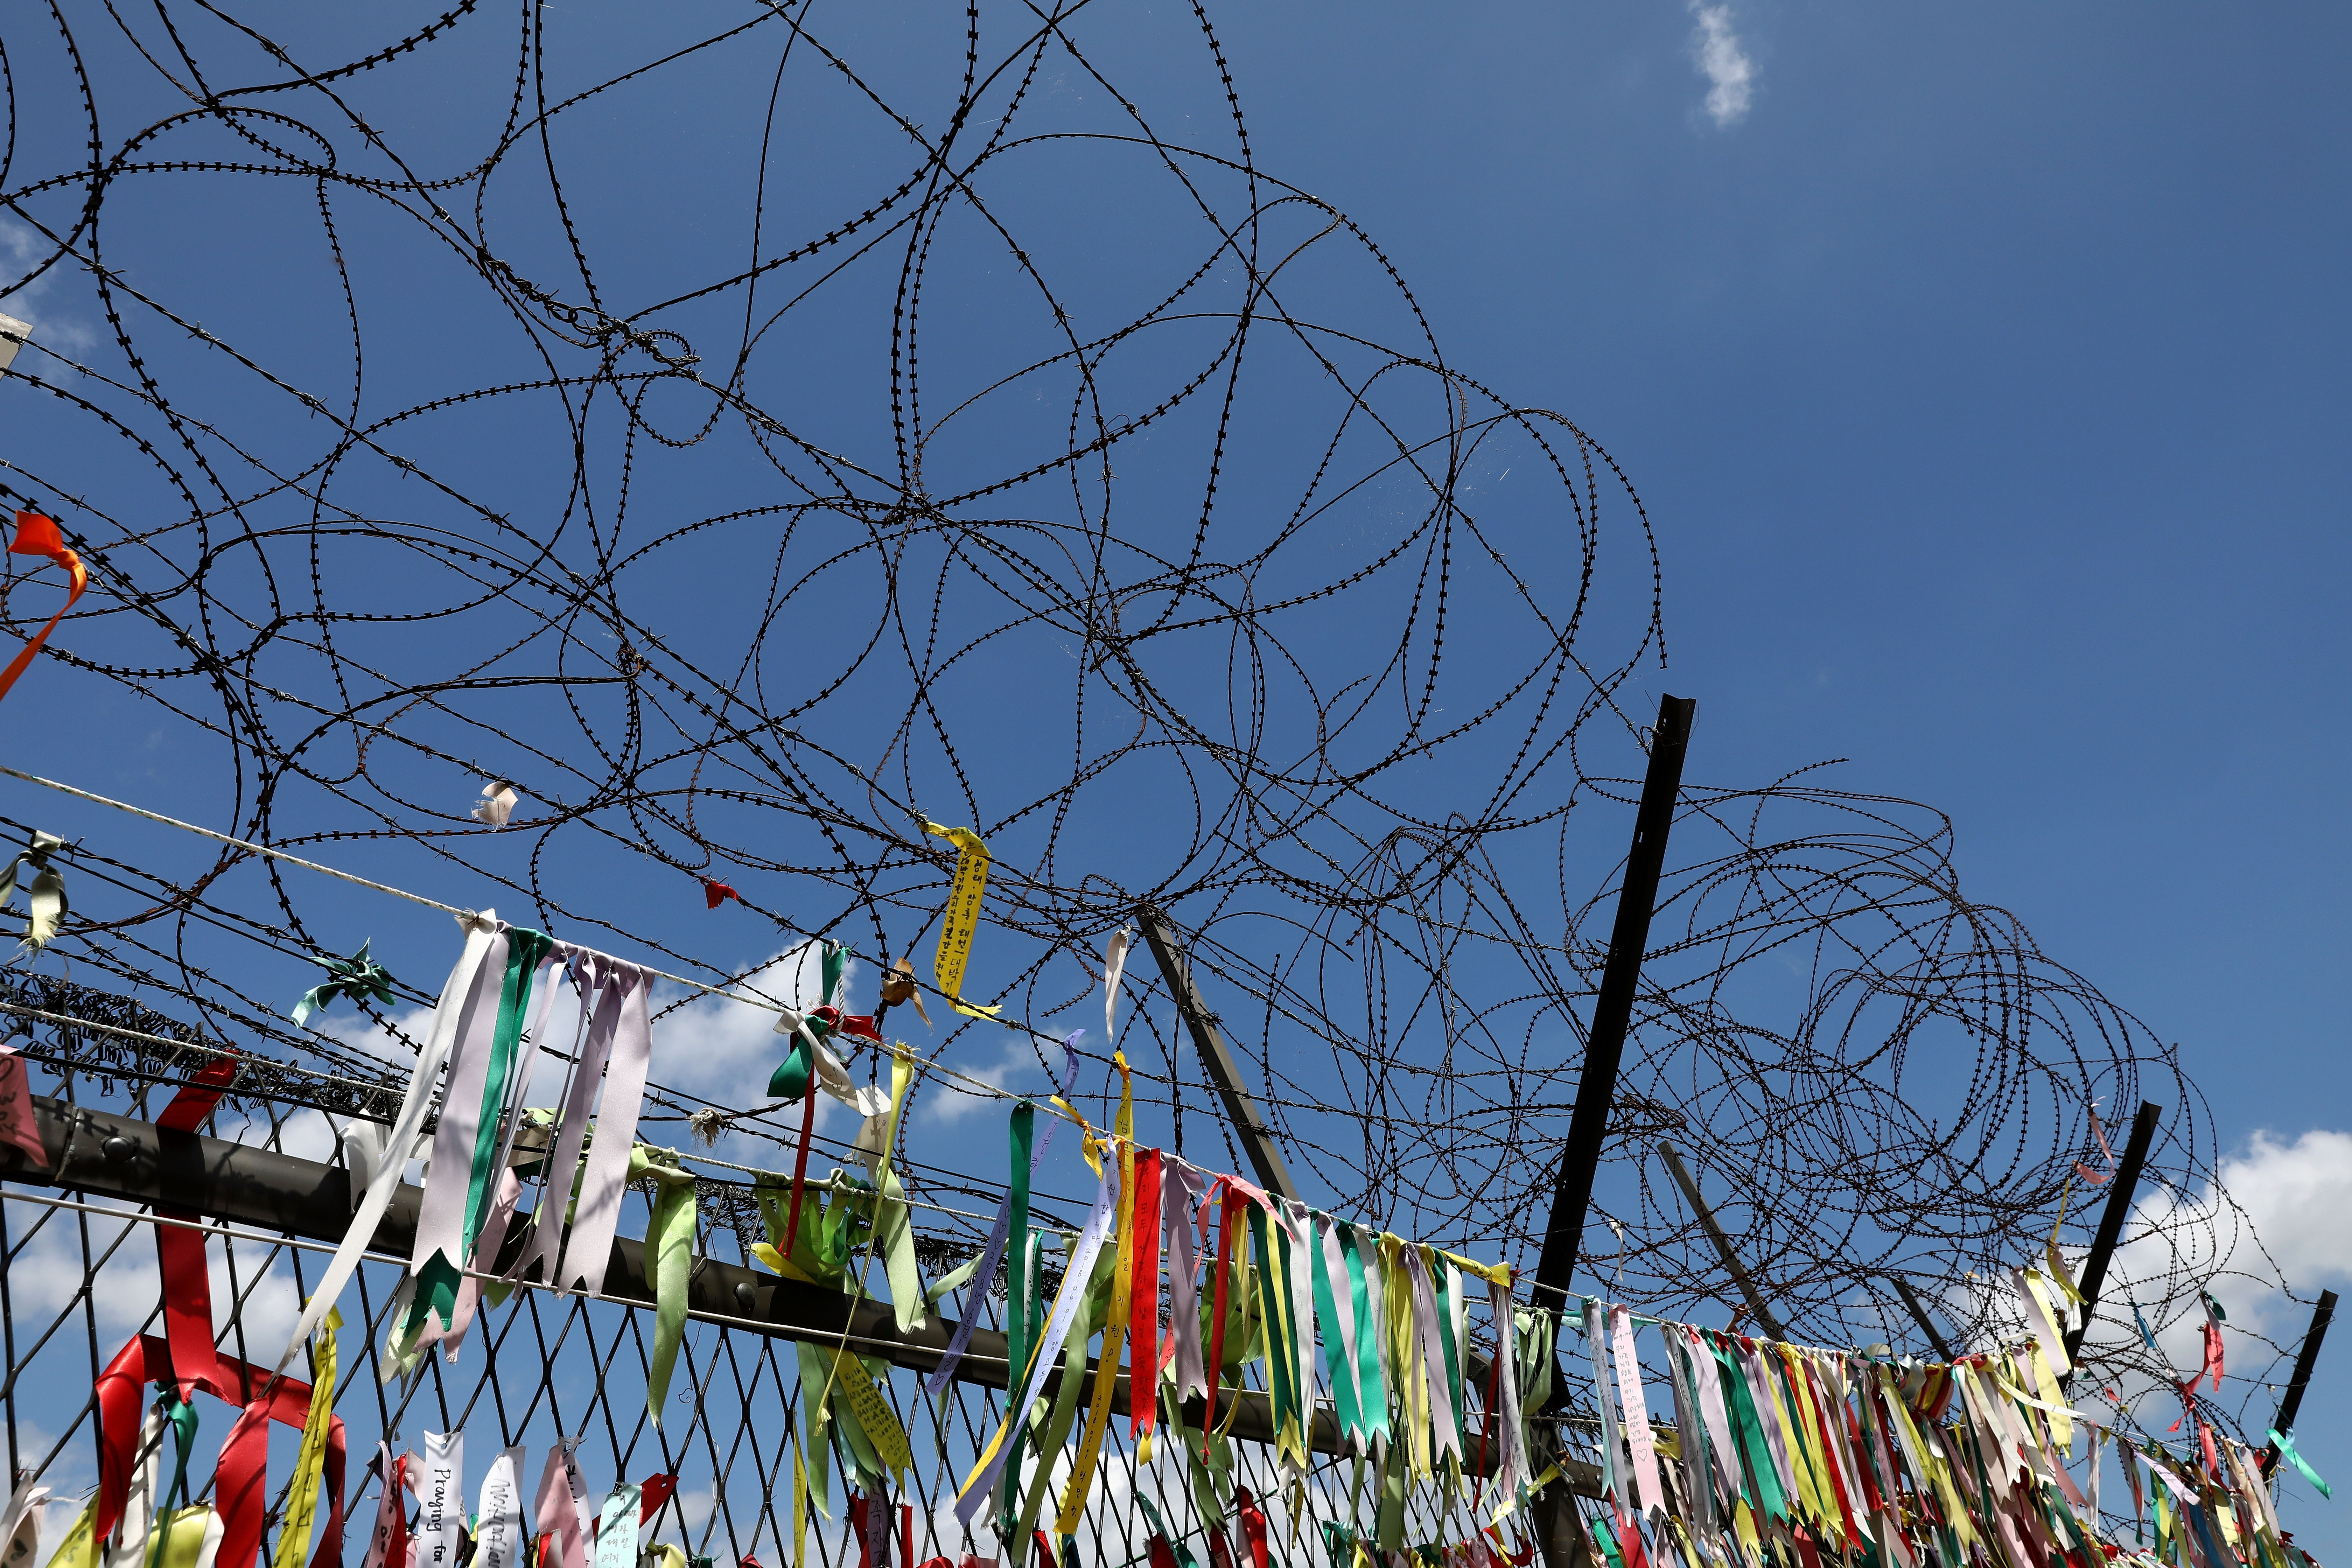 The wire fence at the demilitarized zone (DMZ), which separates South and North Korea.